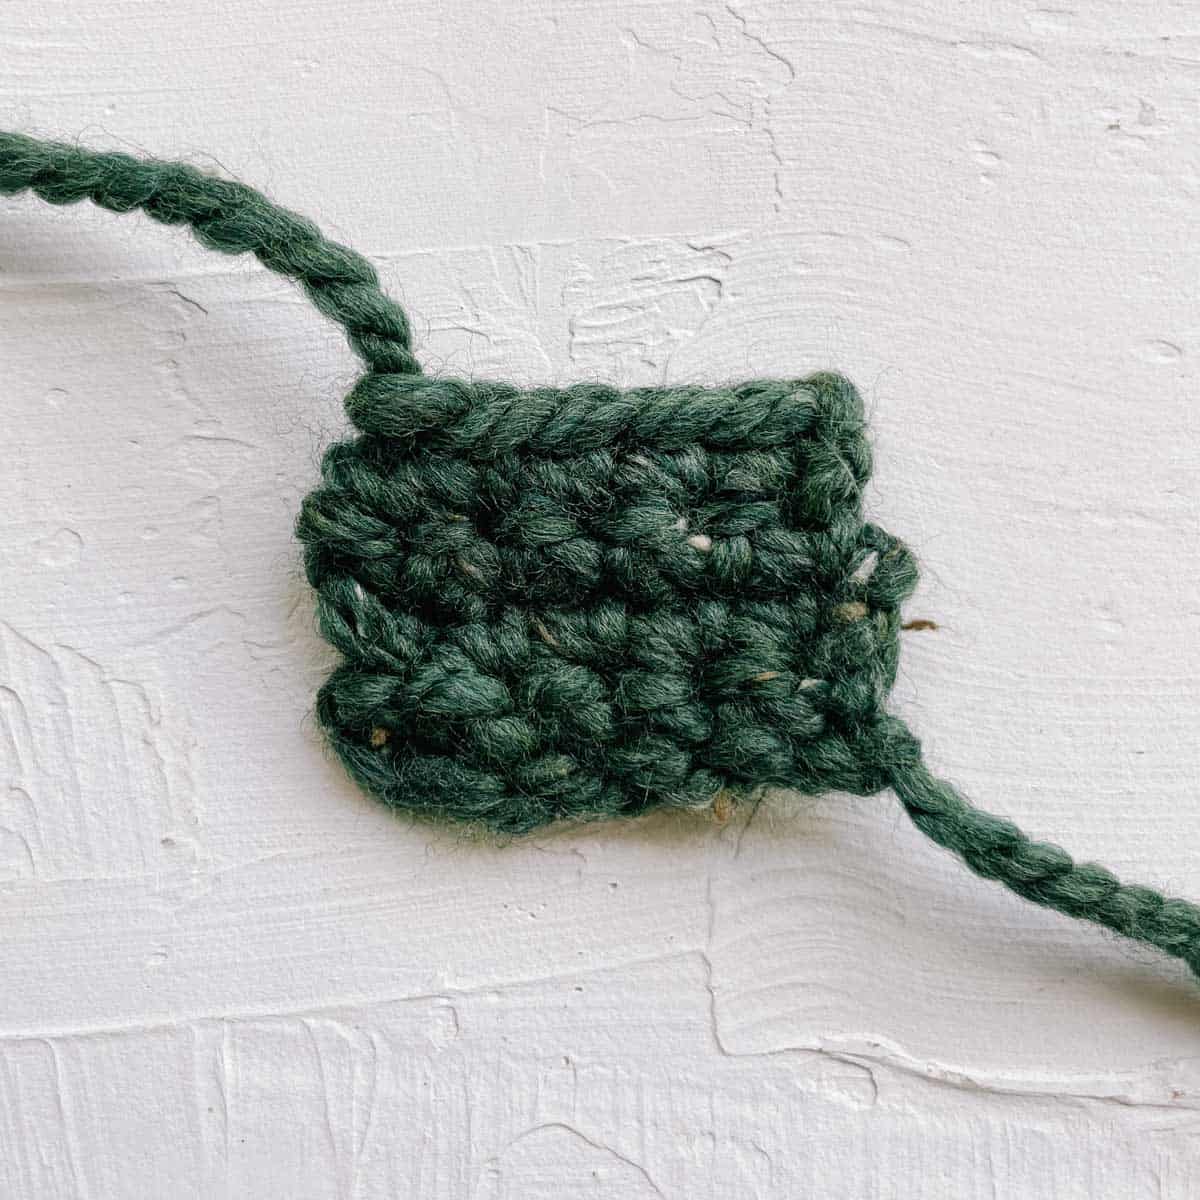 A small crochet rectangle made from green yarn.